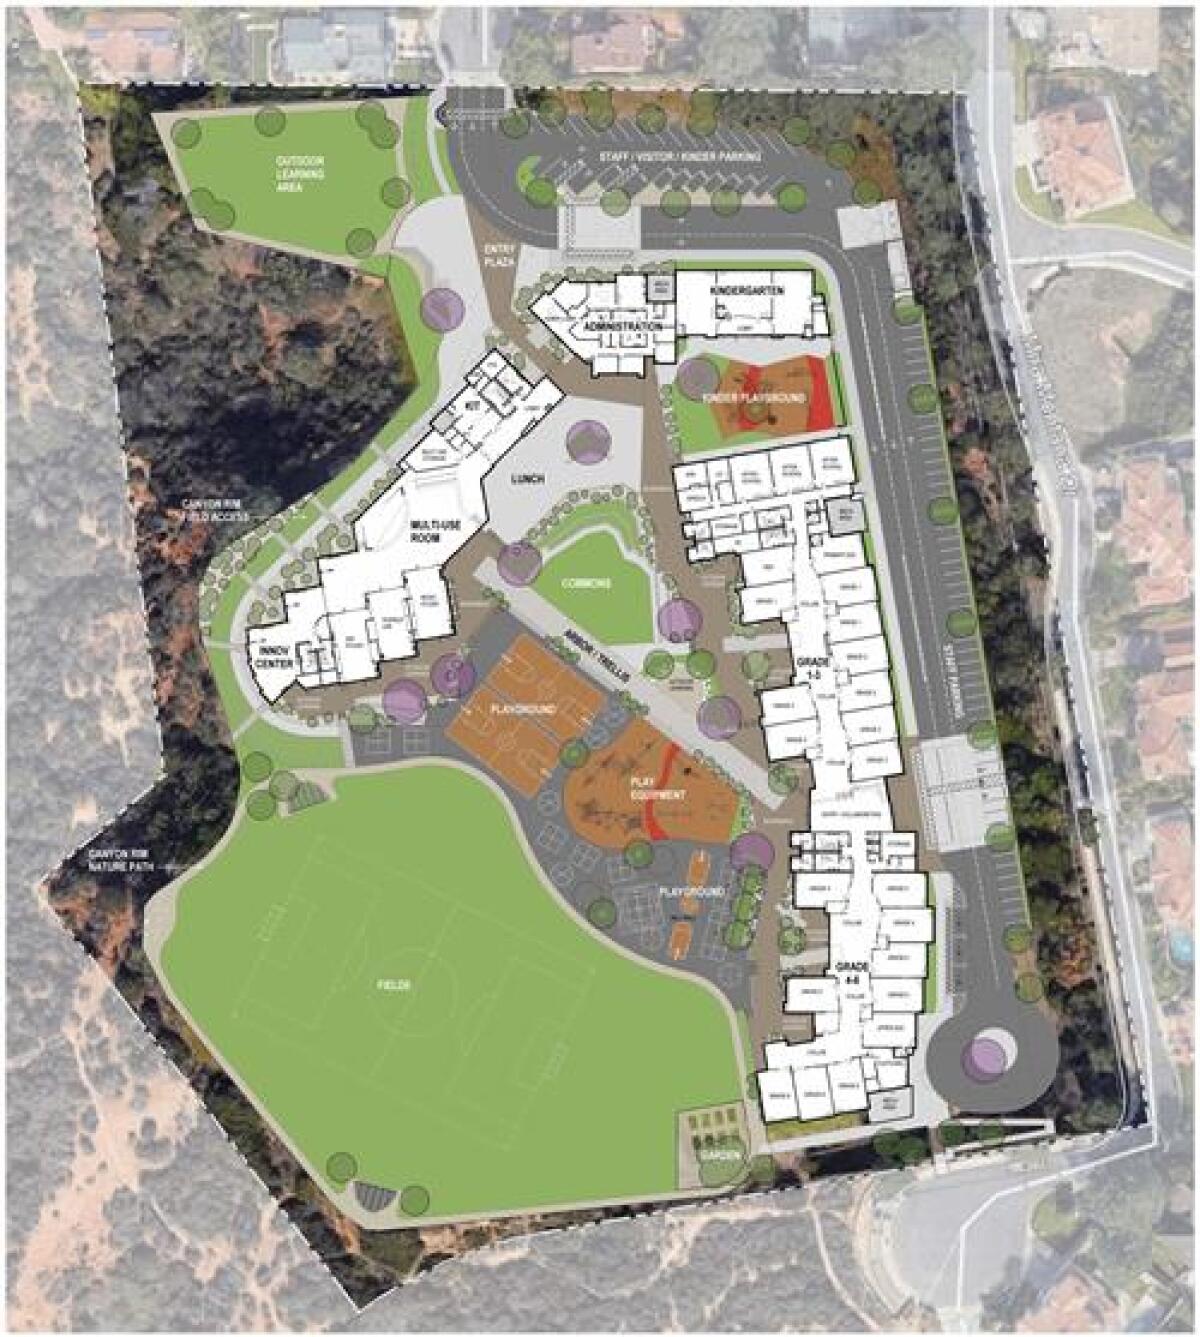 The proposed site plan for the Del Mar Heights School rebuild.